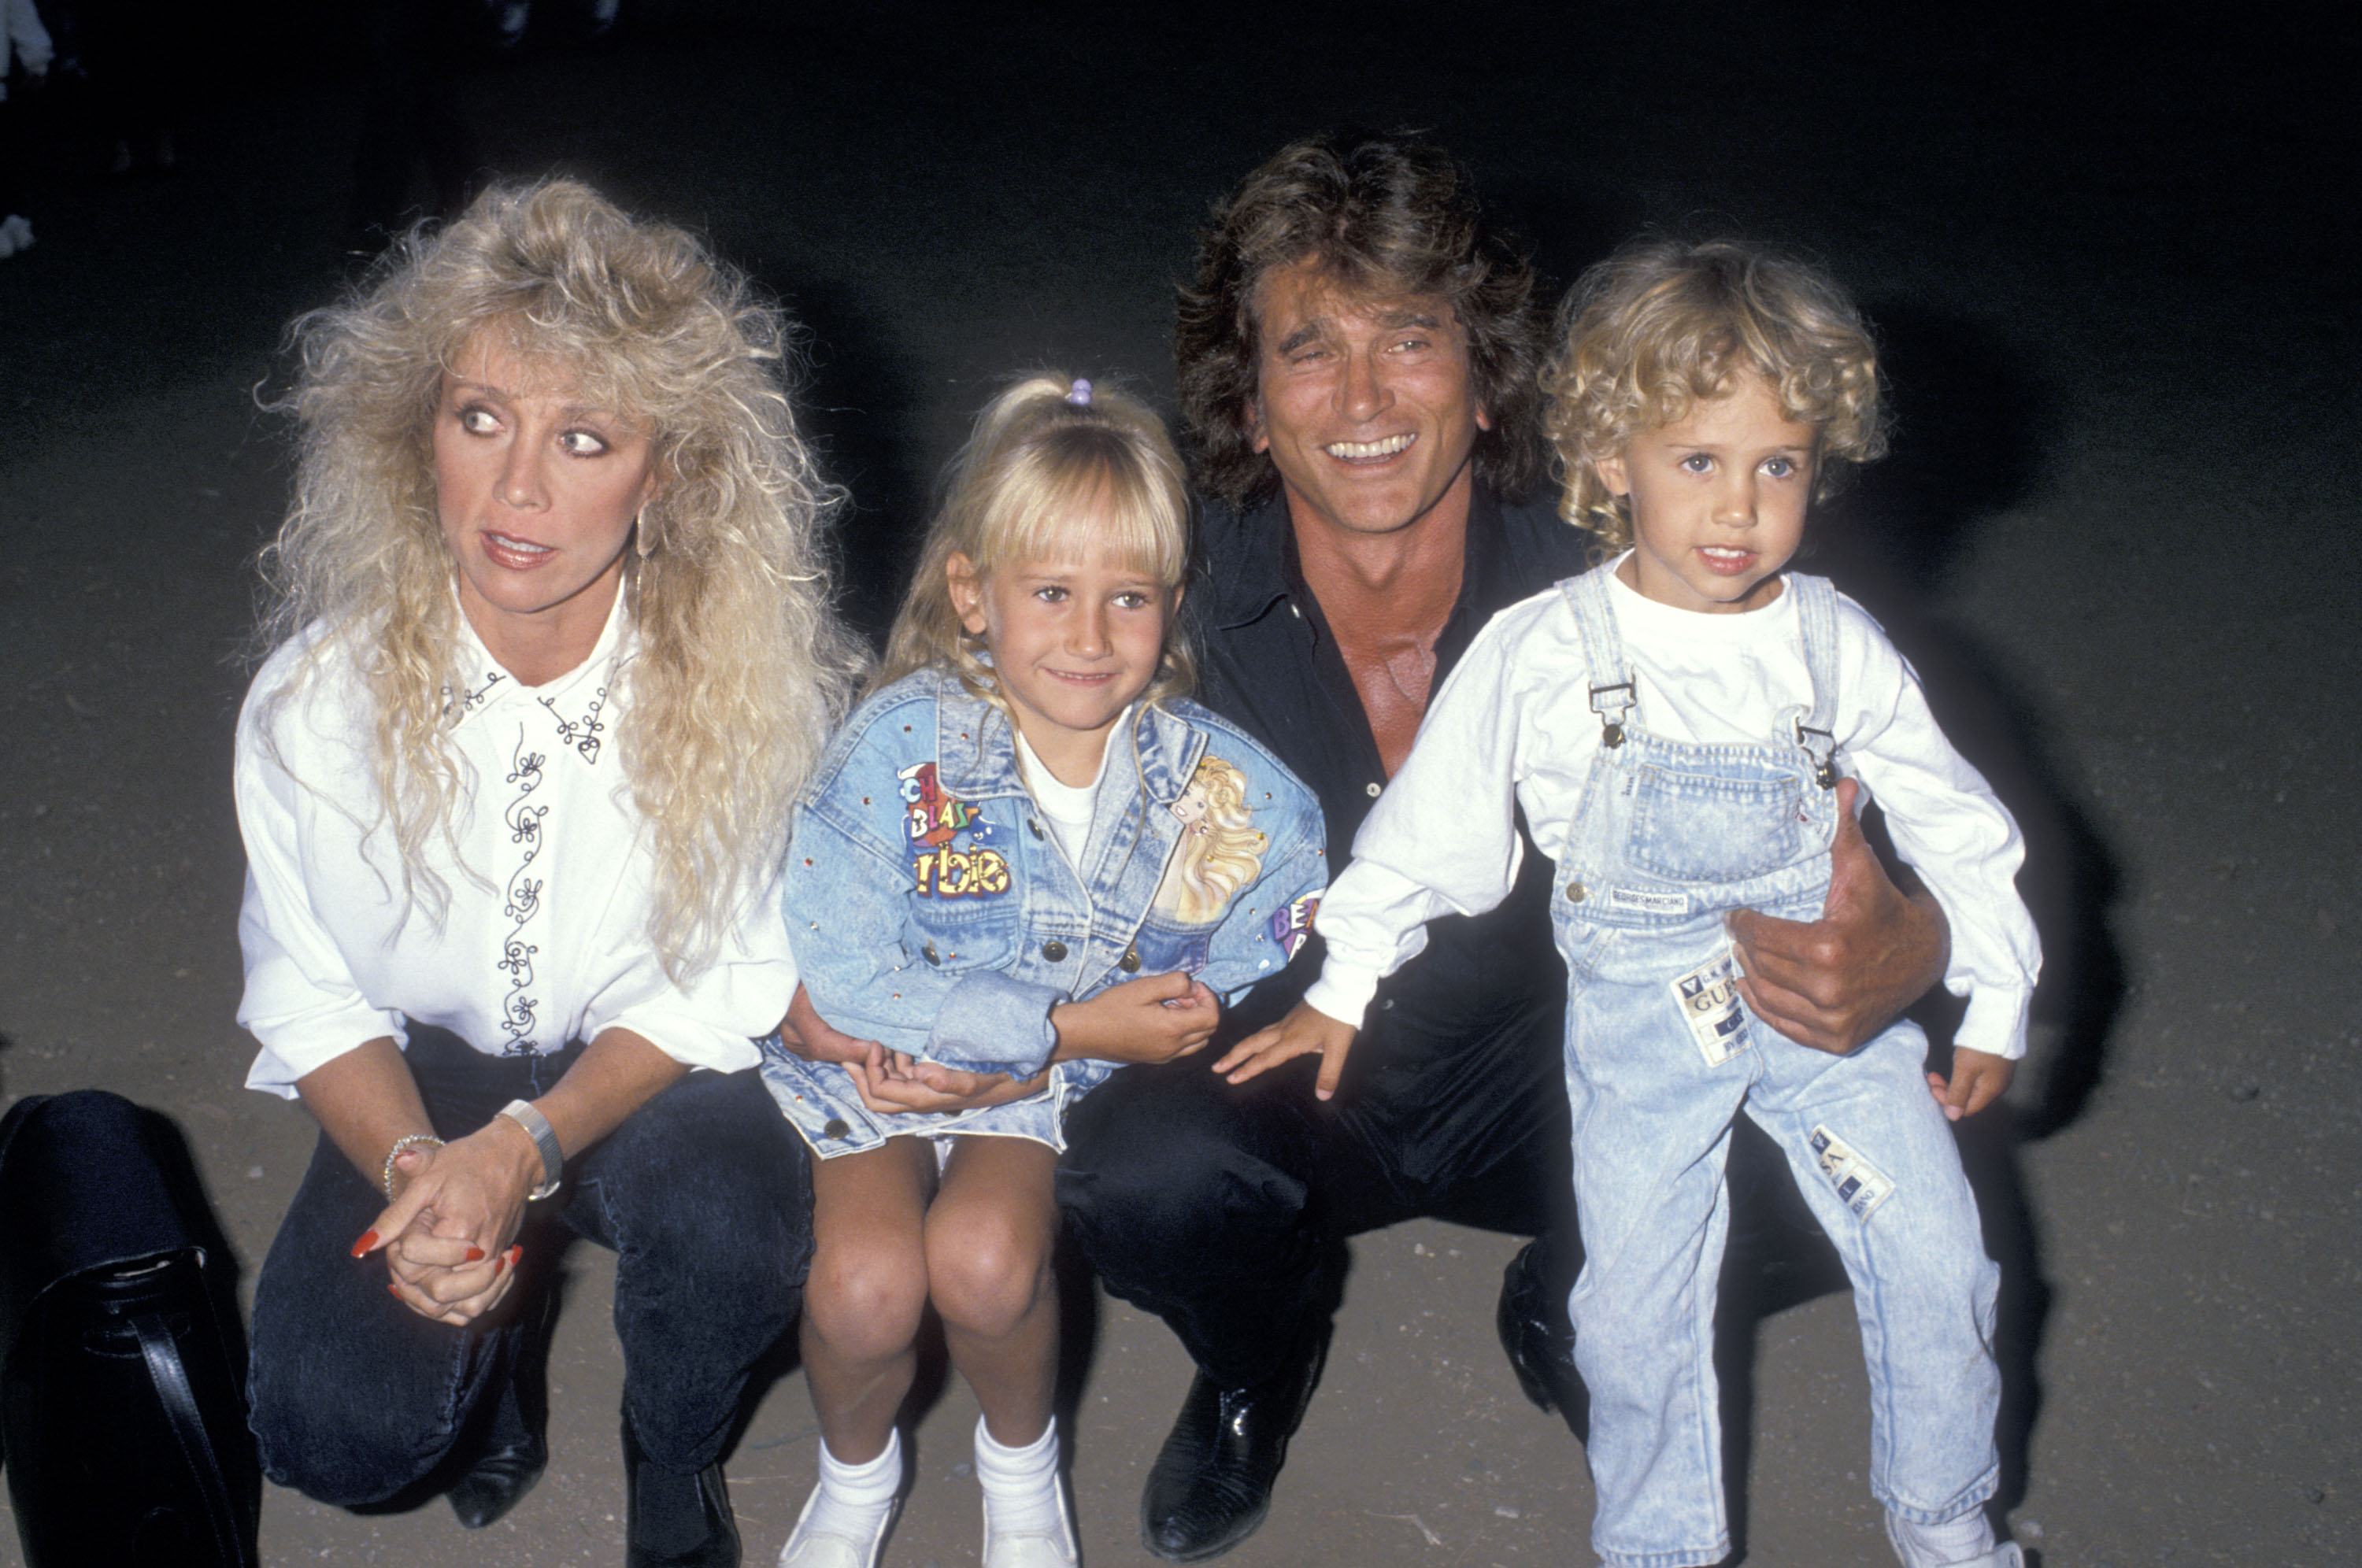 Michael Landon, Cindy Landon, with their daughter Jennifer Landon and son Sean Landon attend the Third Annual Moonlight Roundup Extravaganza on July 29, 1989, at the Calamigos Ranch, in Malibu, California. | Source: Getty Images